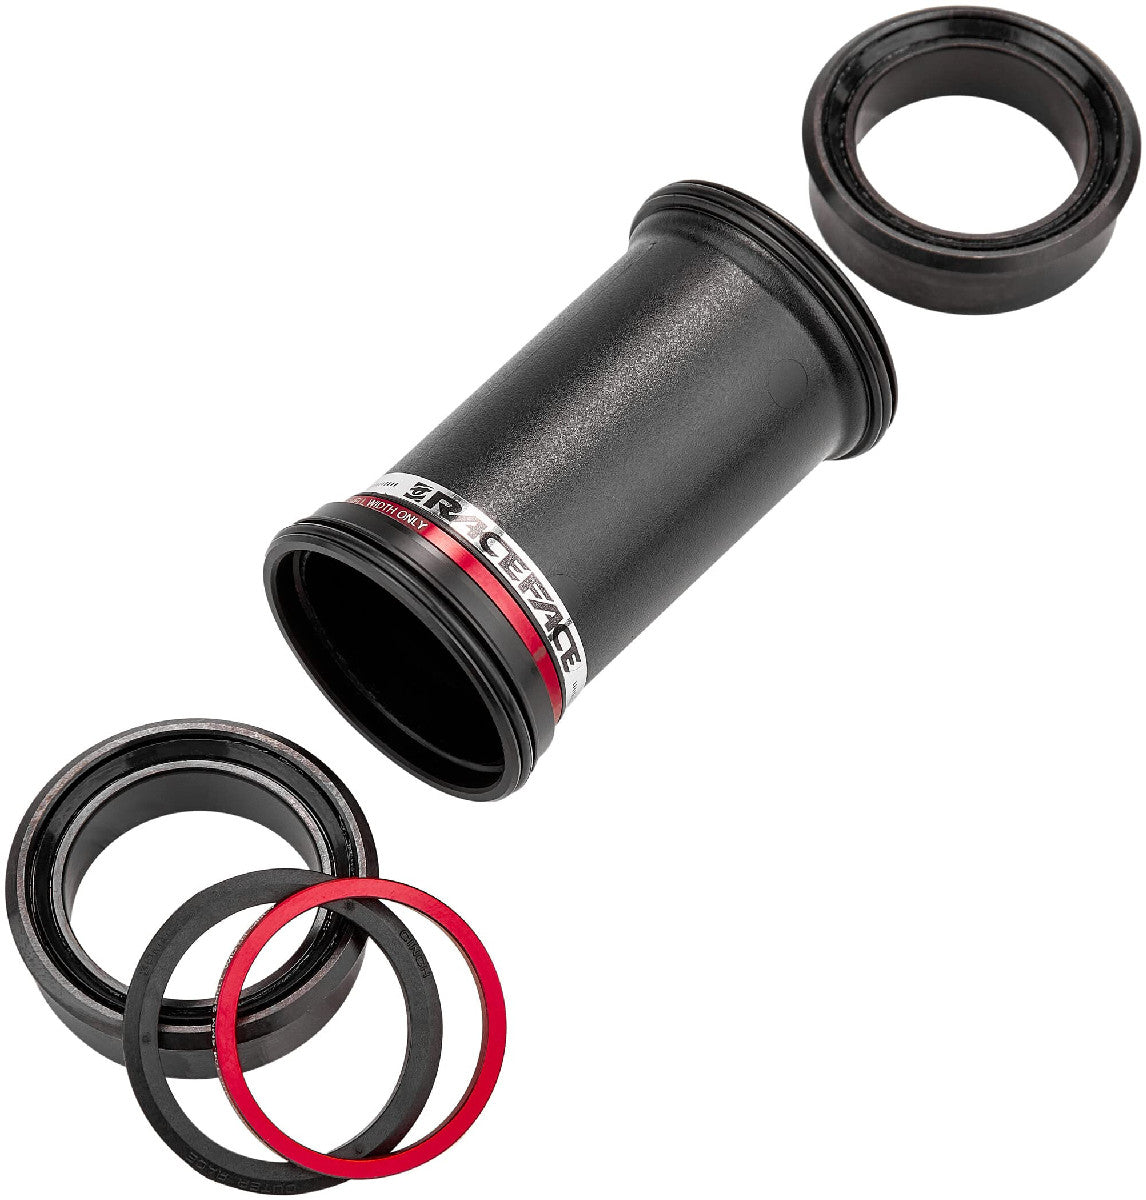 RaceFace CINCH BB92 Bottom Bracket 41mm ID x 92mm Shell x 30mm Spindle - RaceFace Bike Parts